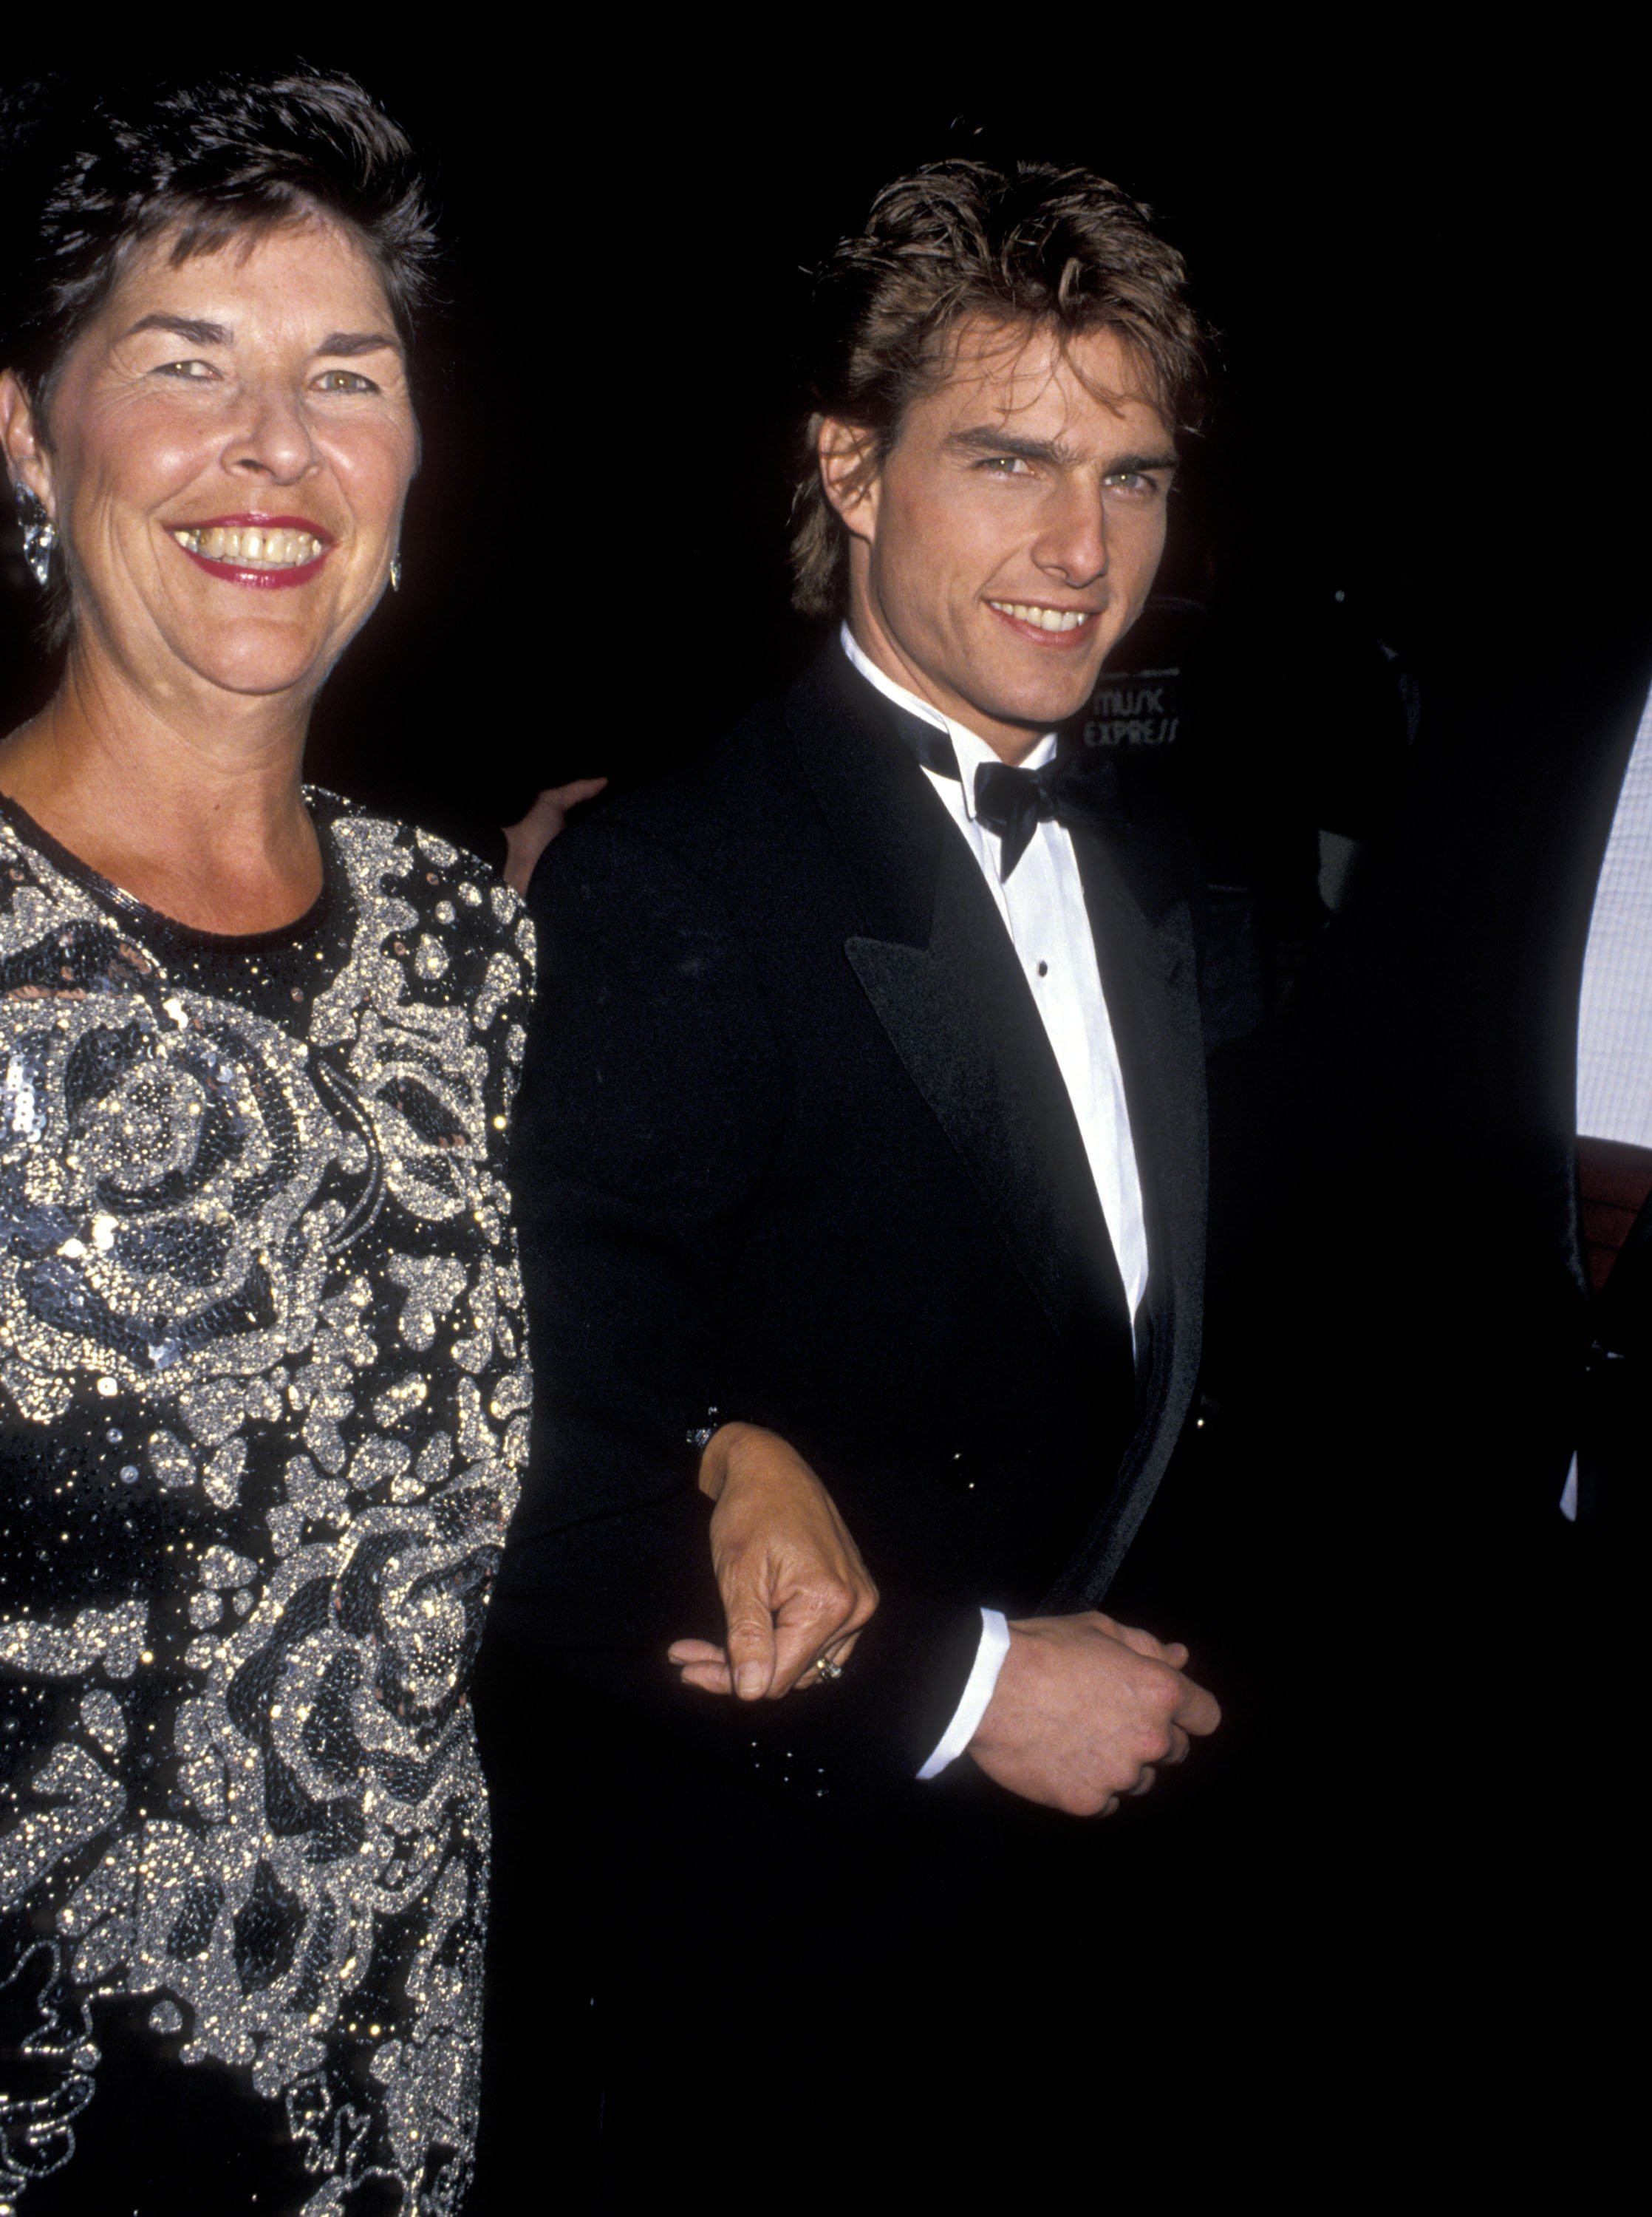 Tom Cruise and mother Mary Lee Pfeiffer attend the 47th Annual Golden Globe Awards at Beverly Hilton Hotel on January 20, 1990, in Beverly Hills, California. | Source: Getty Images